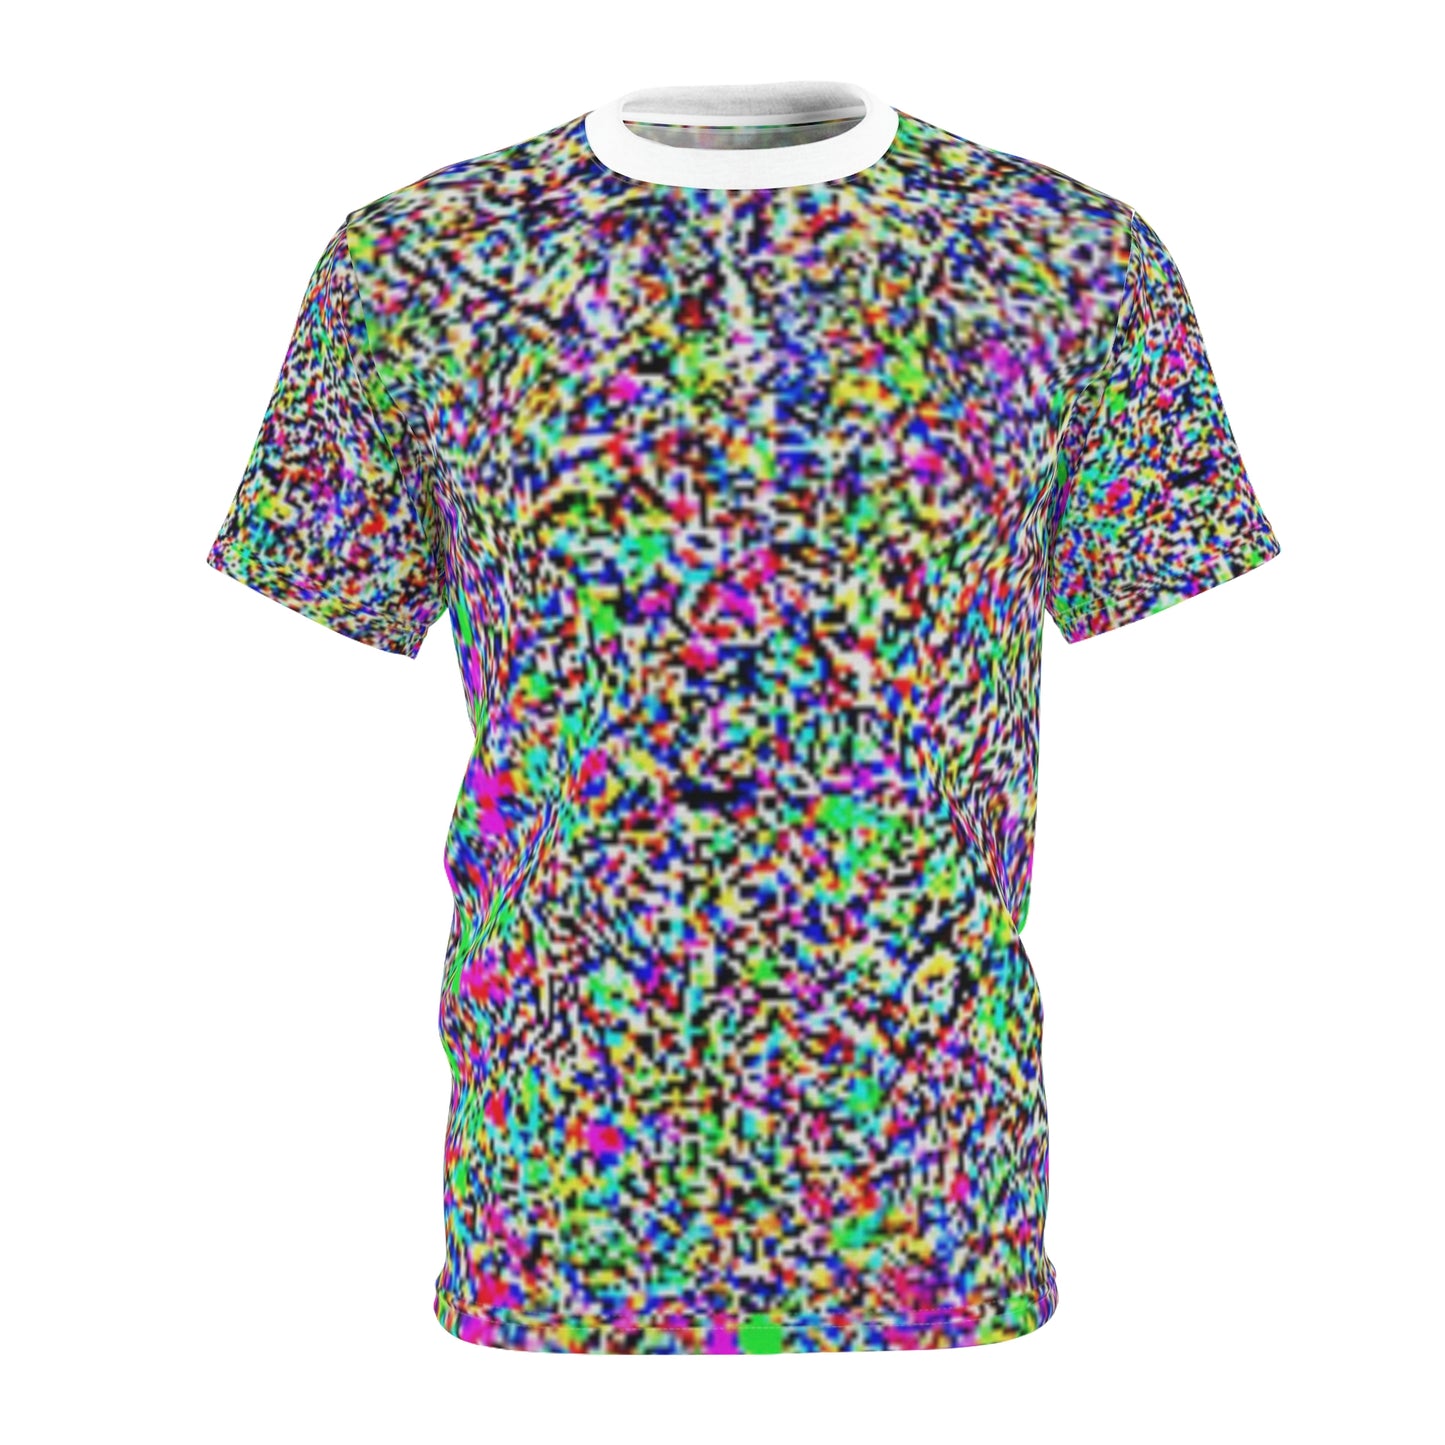 Anti Facial Recognition AI Invisibility Adversarial Pattern Unisex Tee